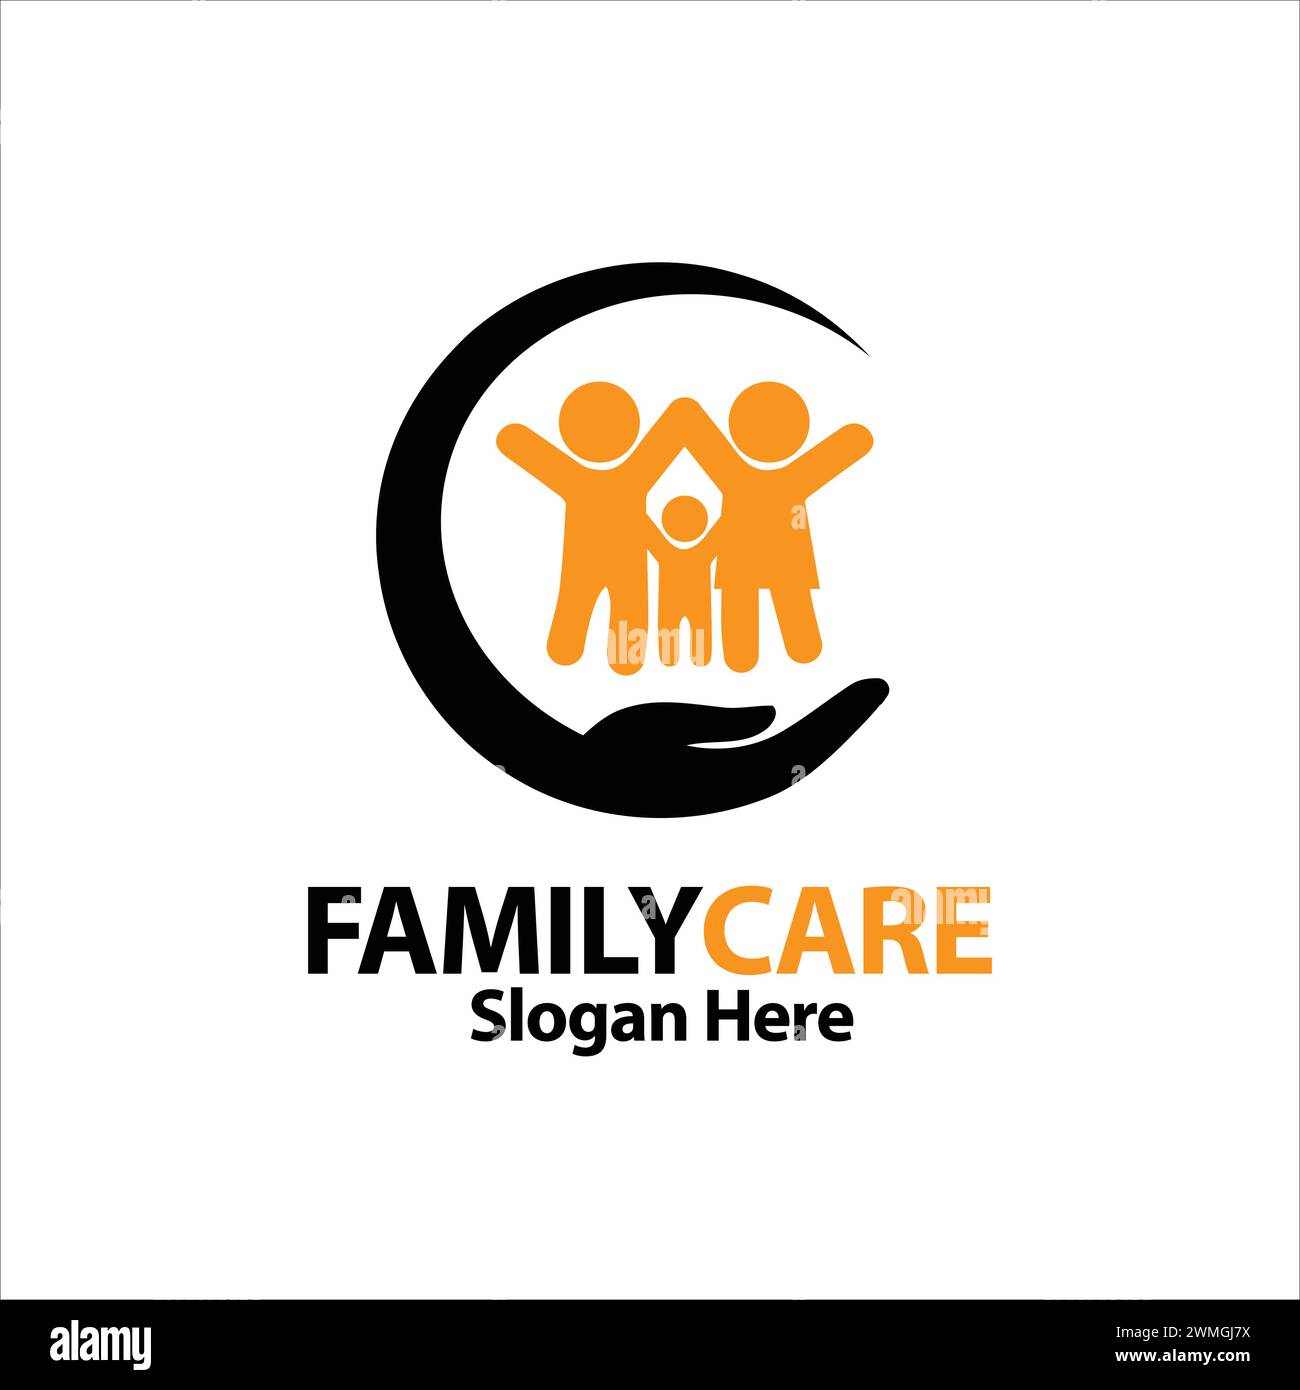 Family Care Logo Design Vector Element Abstract Simple Mascot Style. People Care Illustration Icon Sign Symbol For Associations. Stock Vector